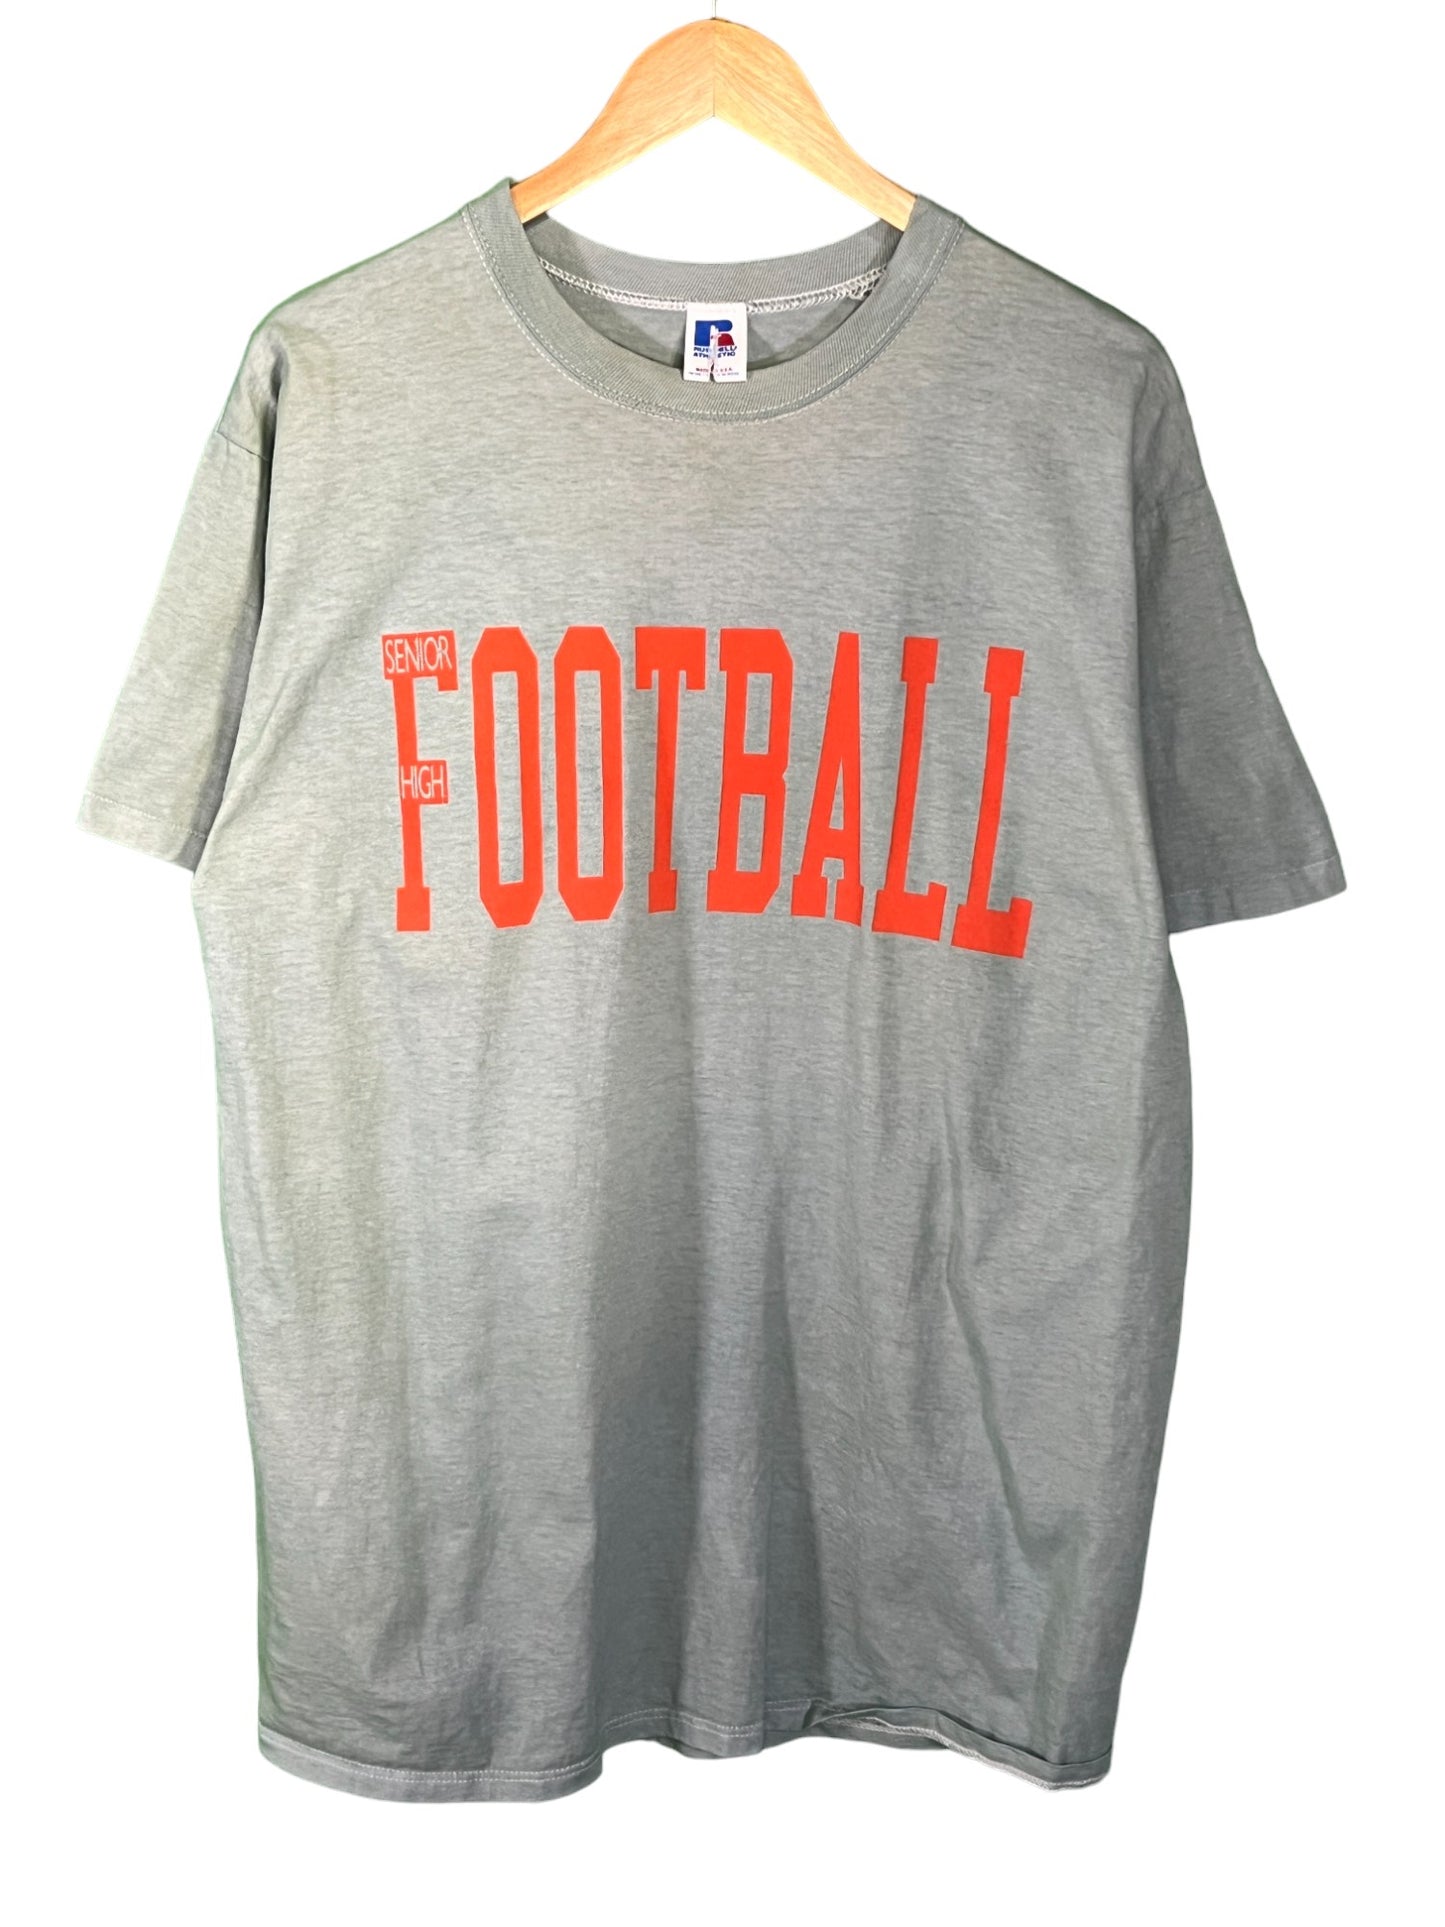 Vintage 90's Russell Billings Senior High Football Upcycled Tee Size Large